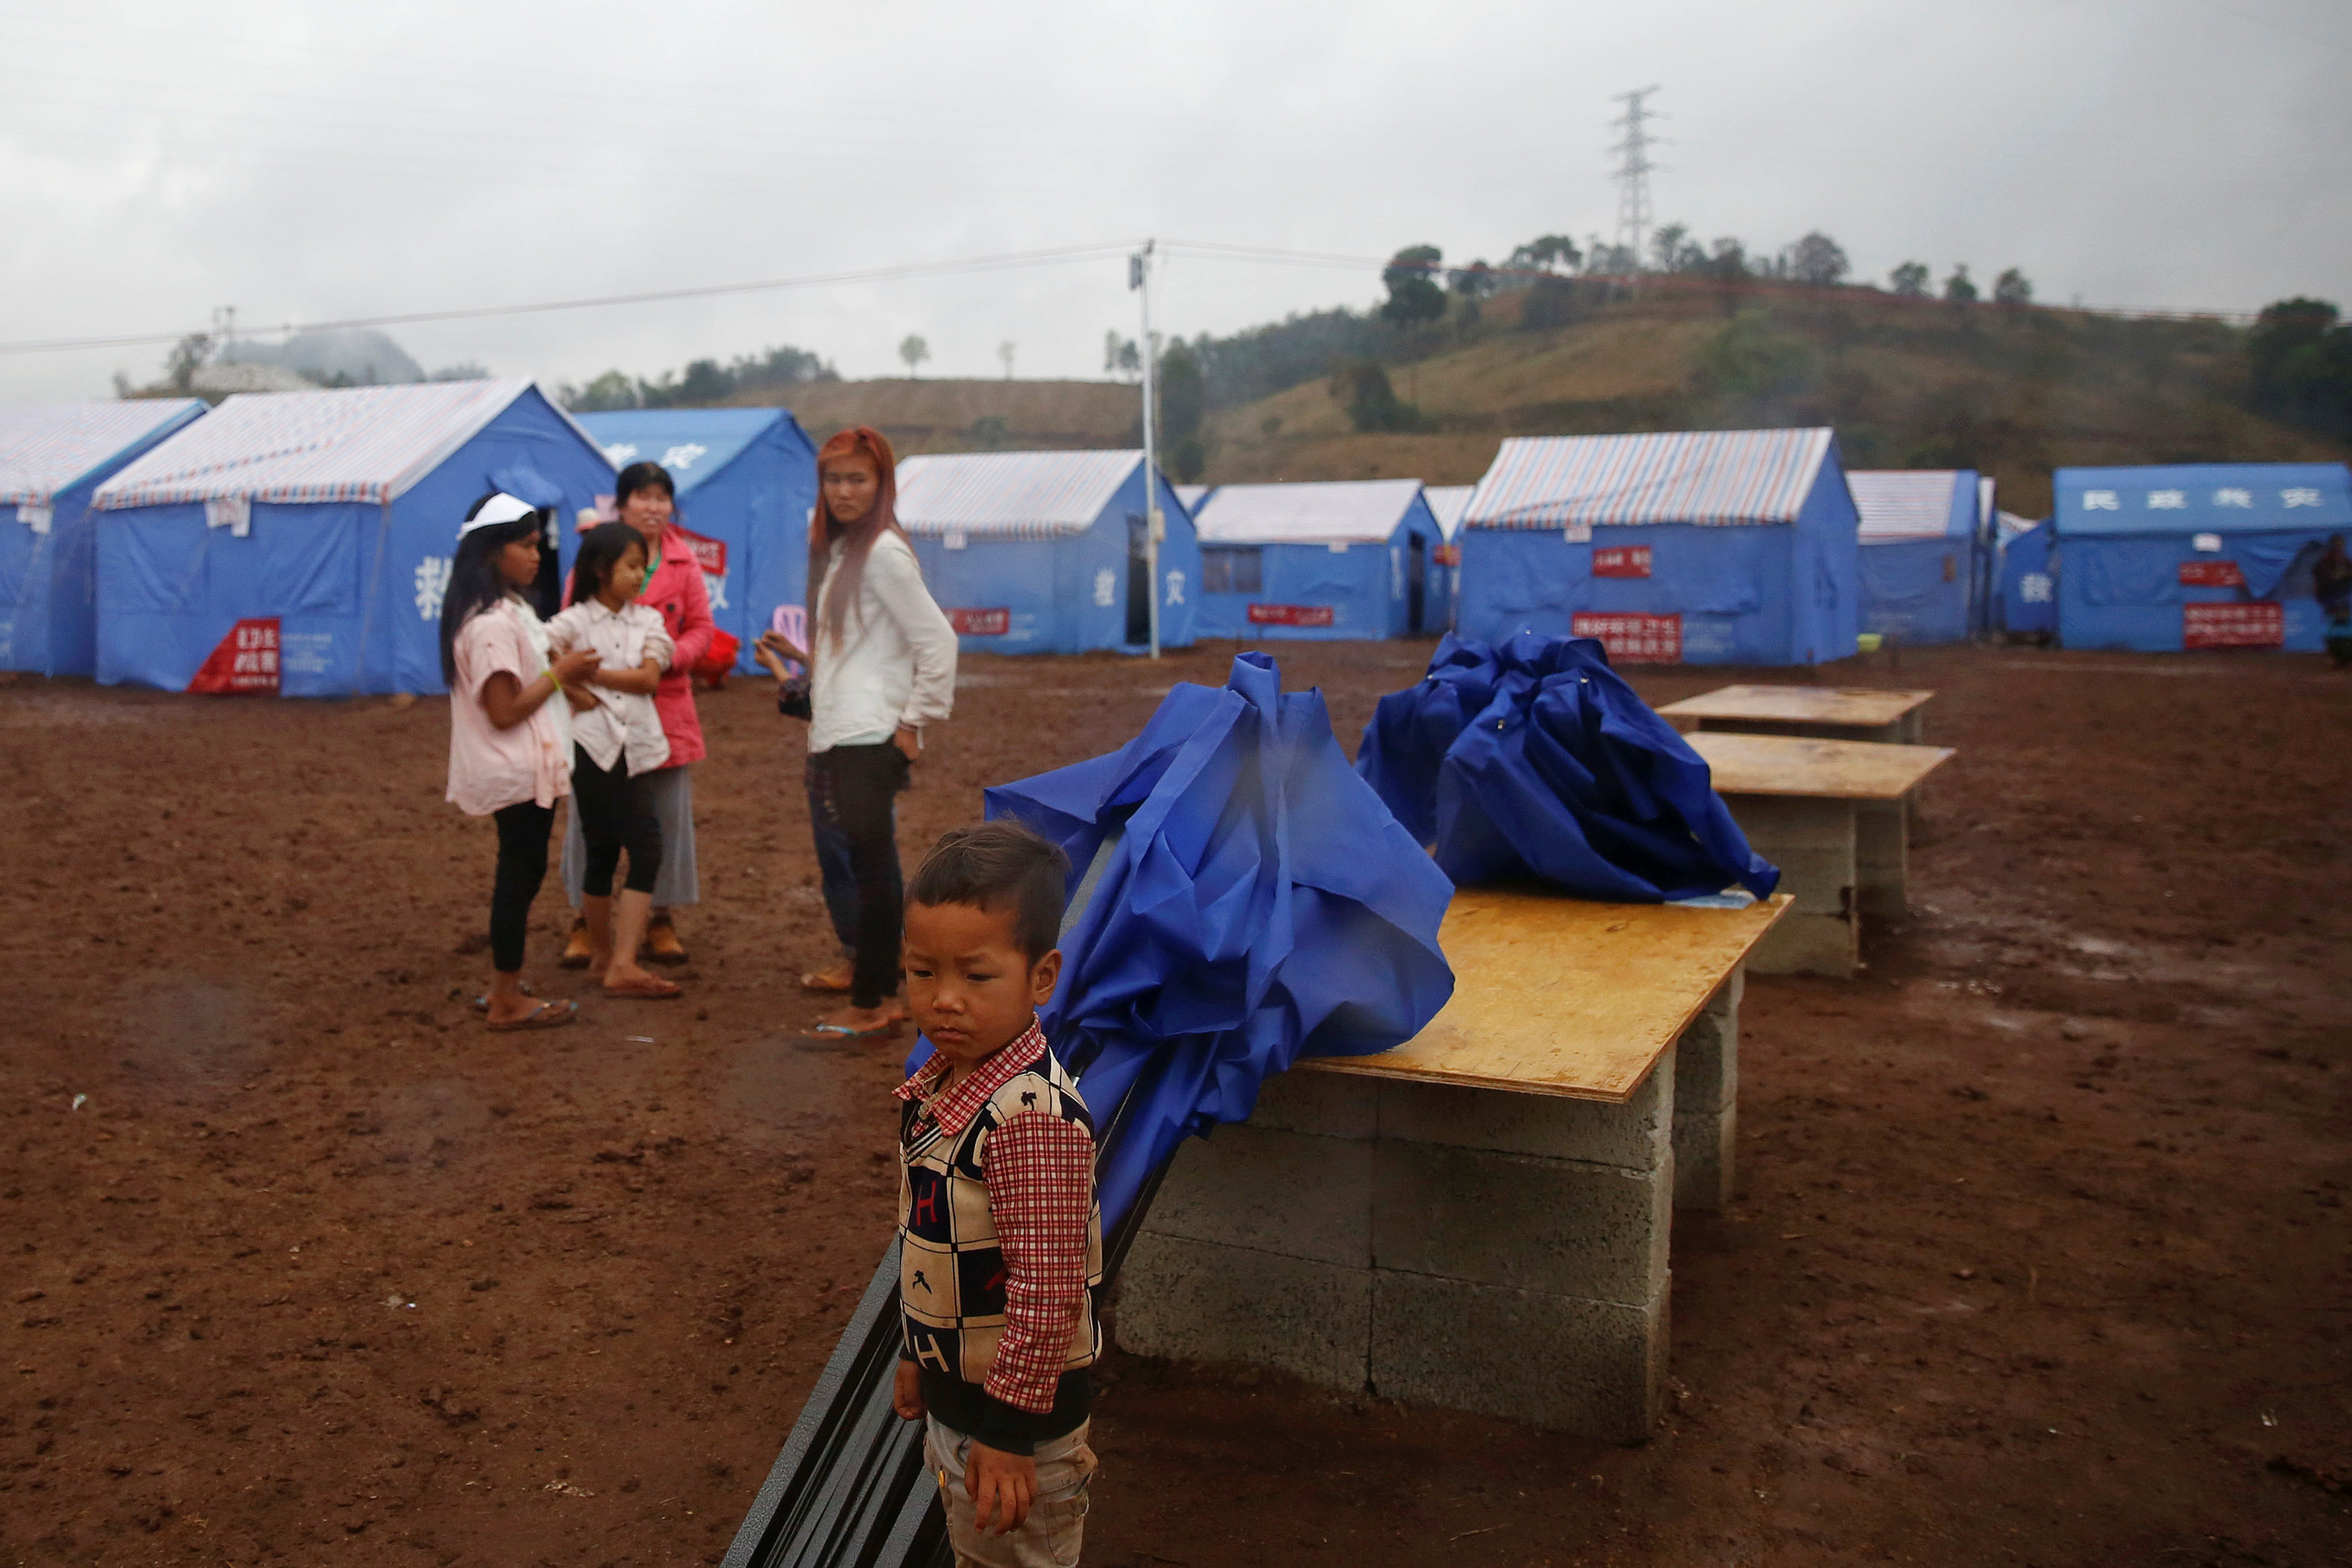 Relief camp in China swells as thousands flee conflict in Myanmar